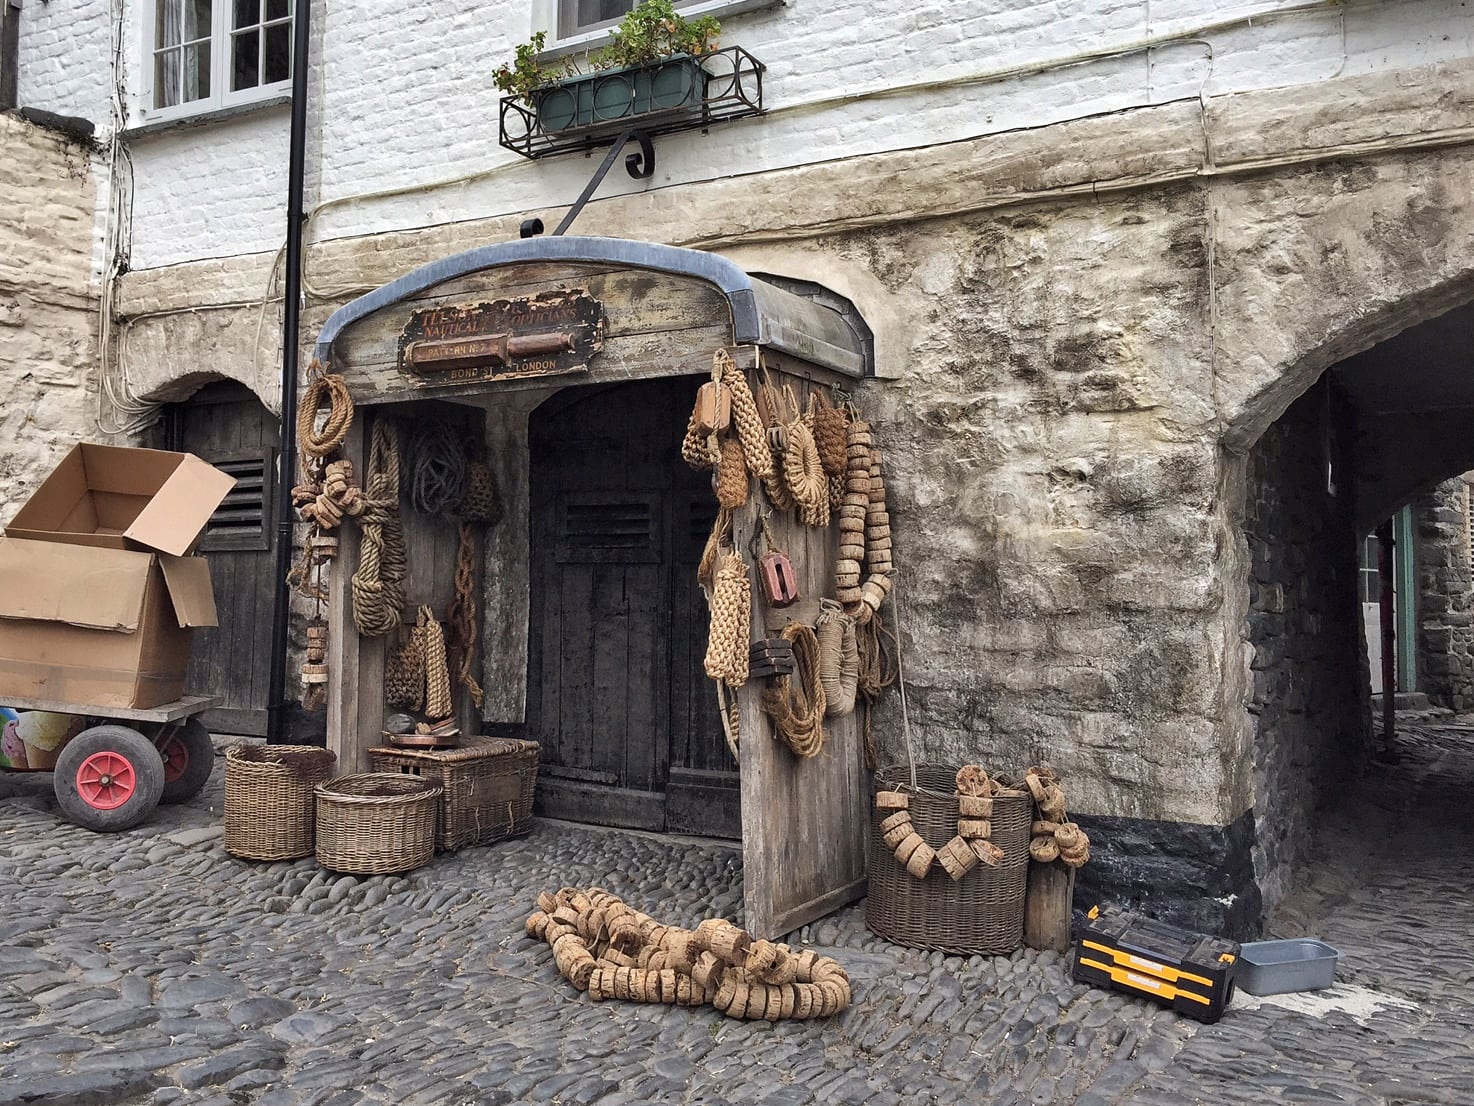 ‘Never a Dull Moment in Clovelly’. Blog by Ellie Jarvis